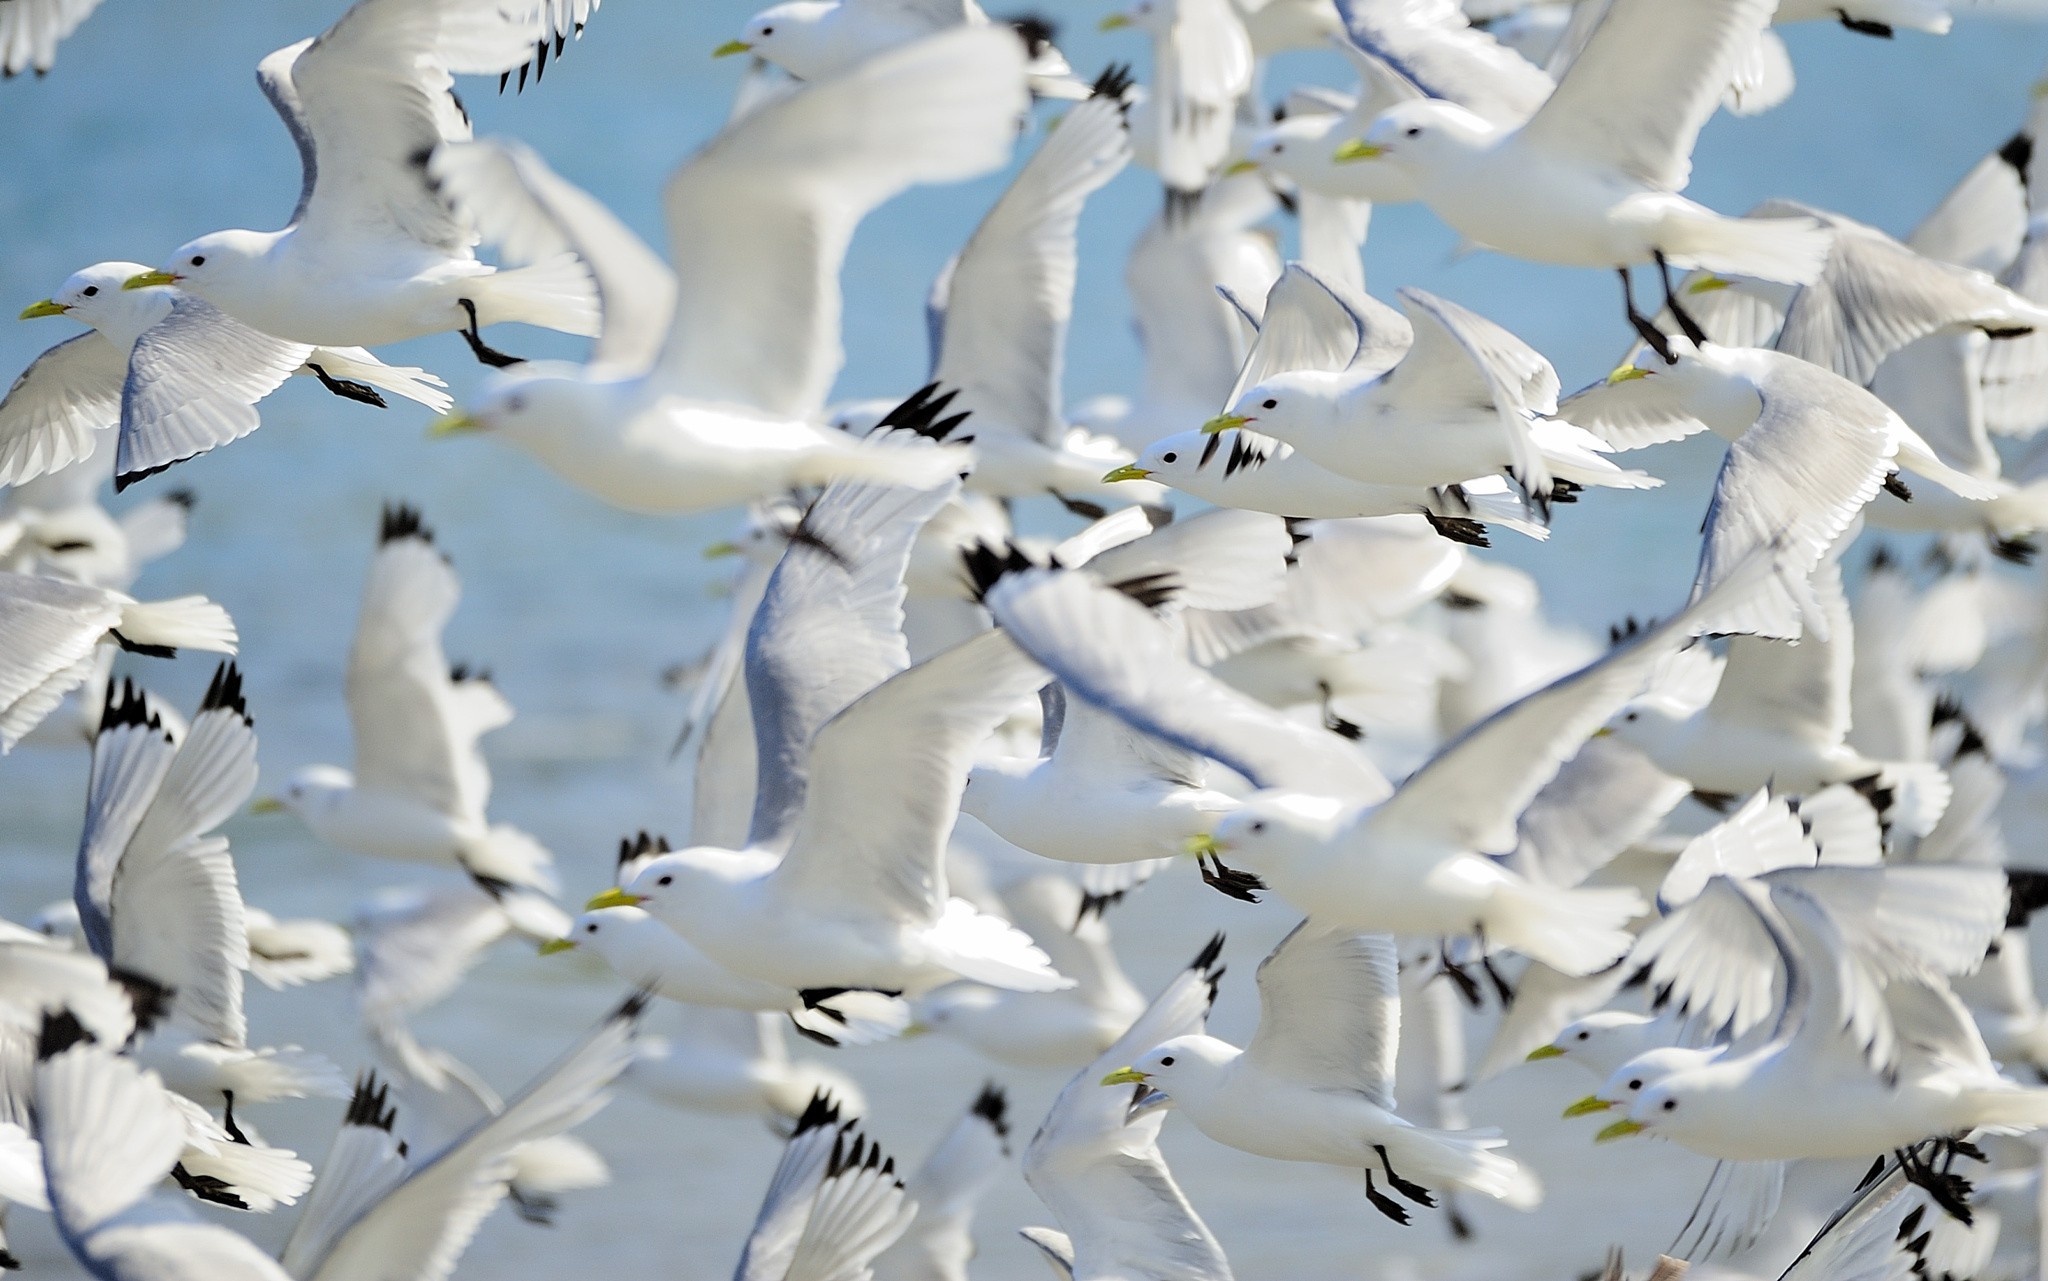 General 2048x1281 birds animals flying seagulls nature daylight clear sky